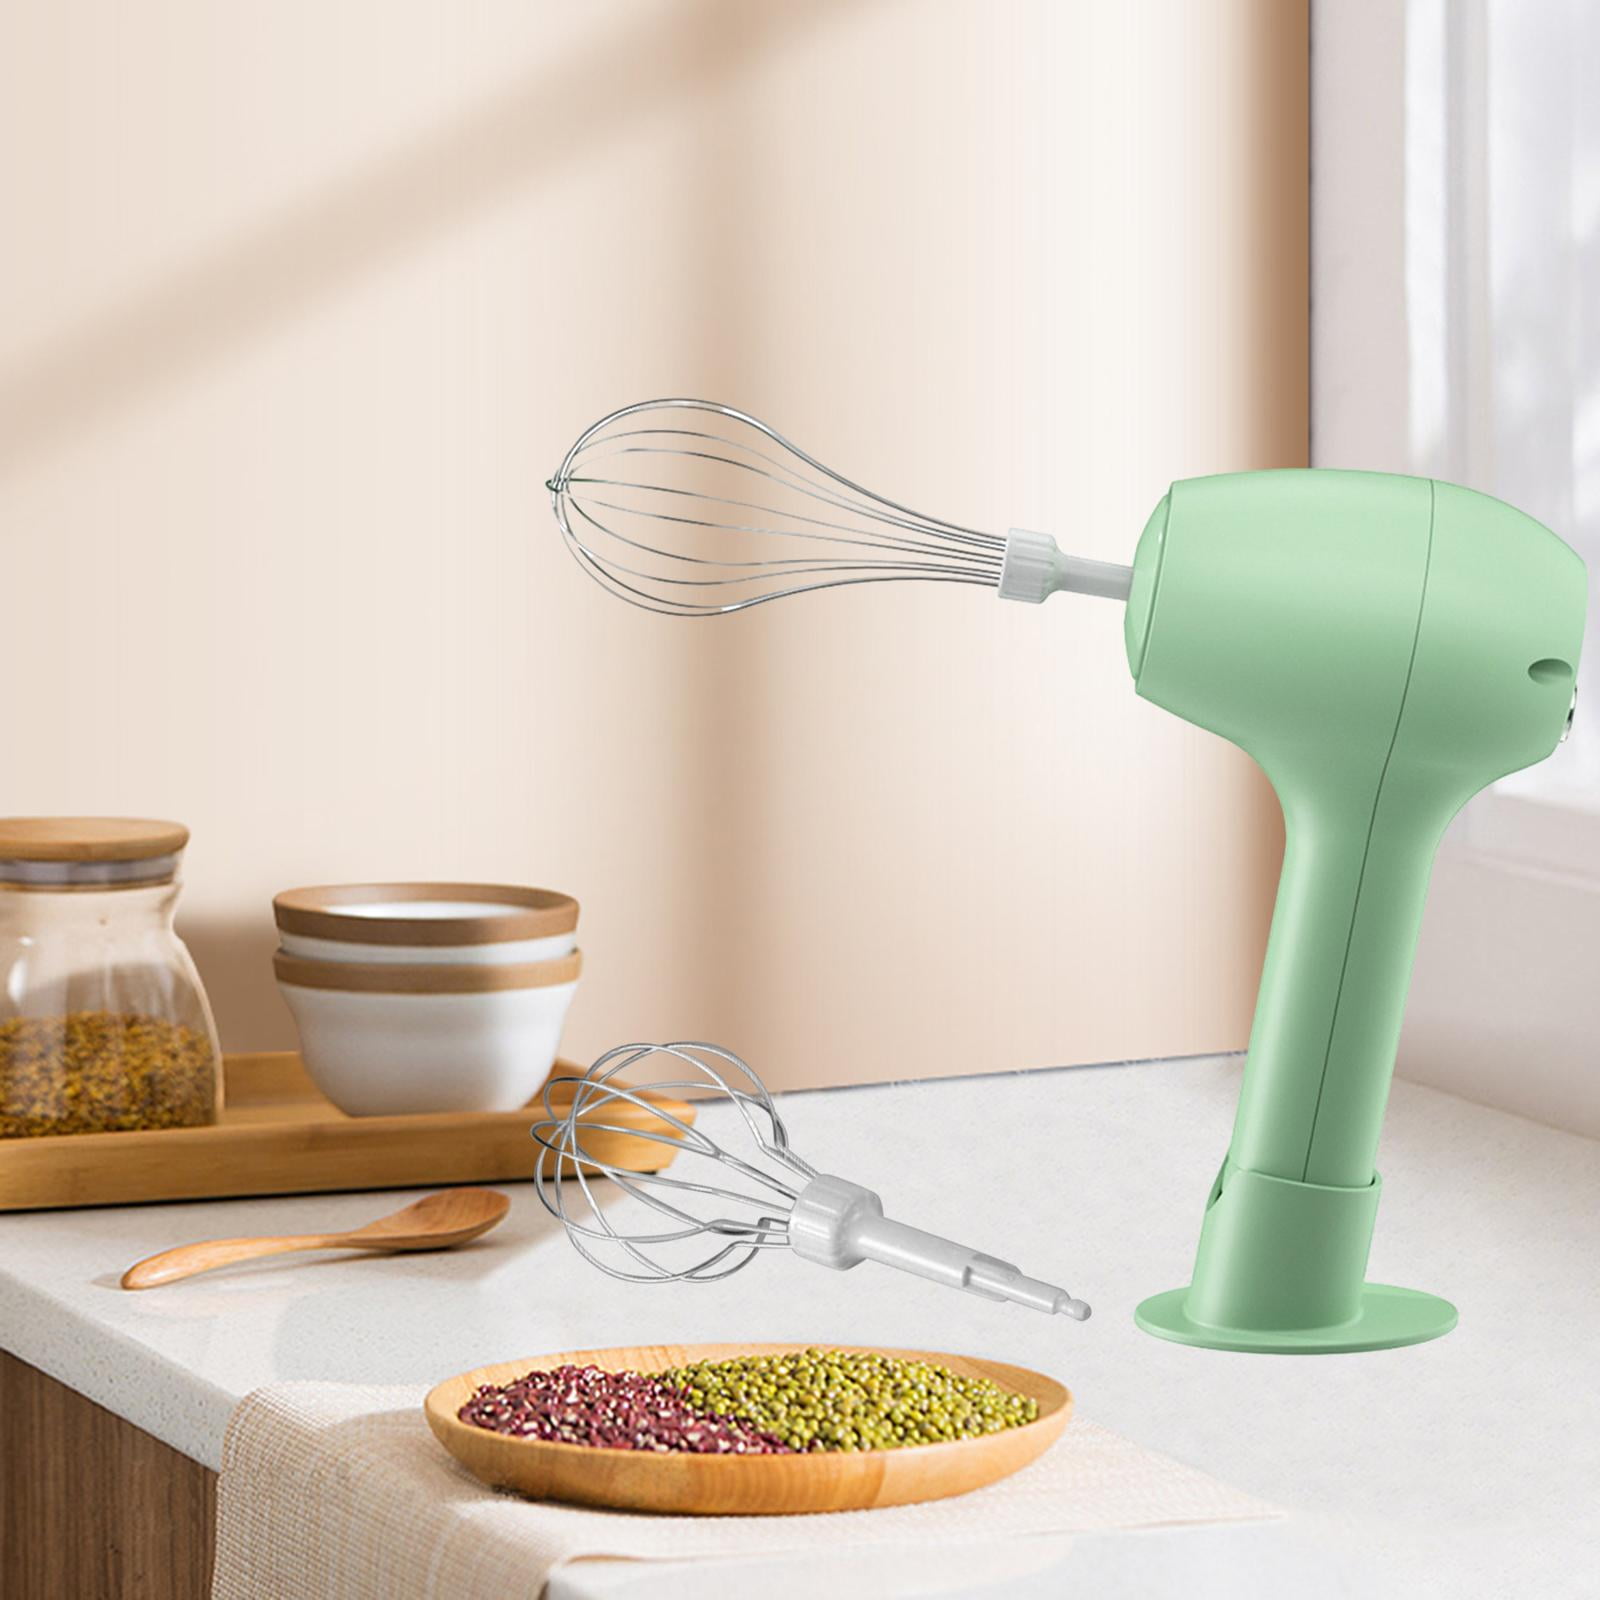 1 Piece Greenportable Milk Shaker, Portable Mini Whisk, Cordless Mini  Automatic Blender, Coffee, Hot Chocolate Electric Handheld Frother Mixer